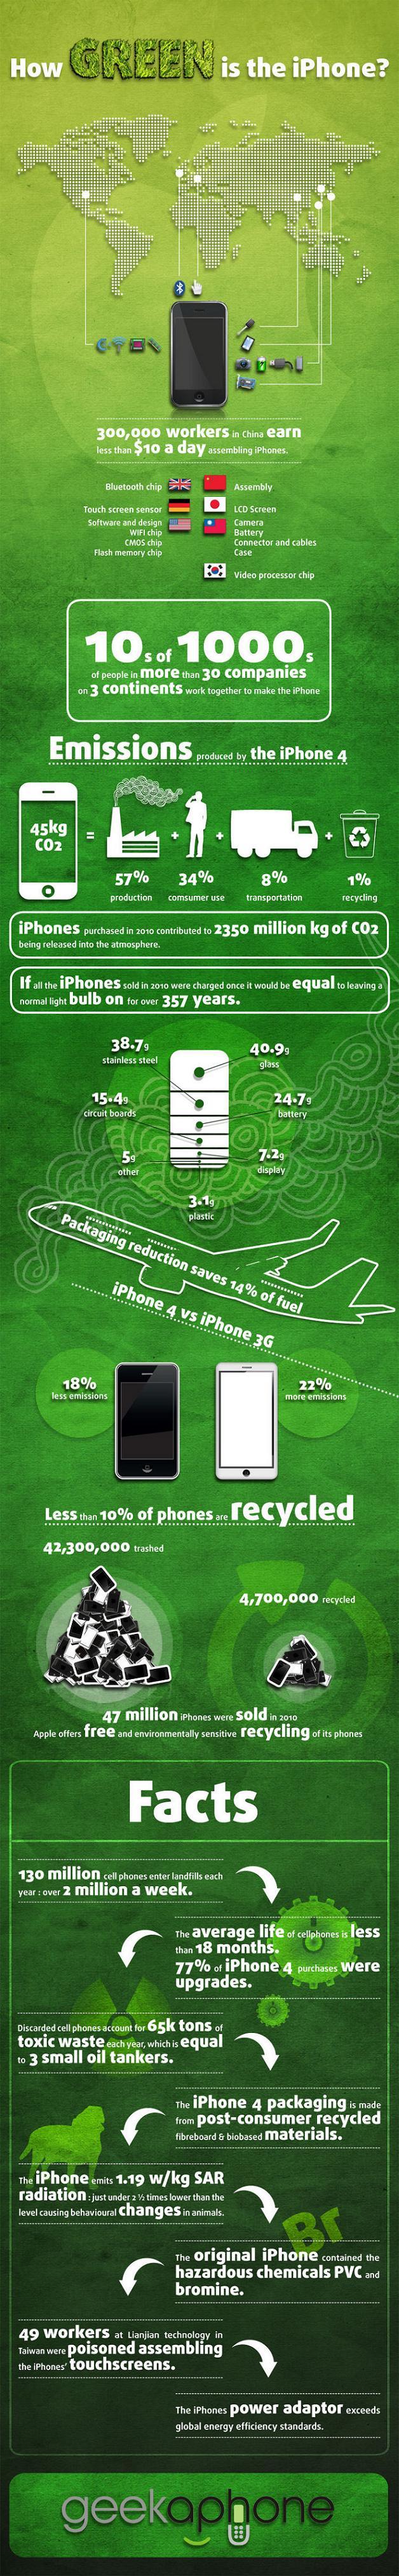 Infographie : How green is the Iphone ?